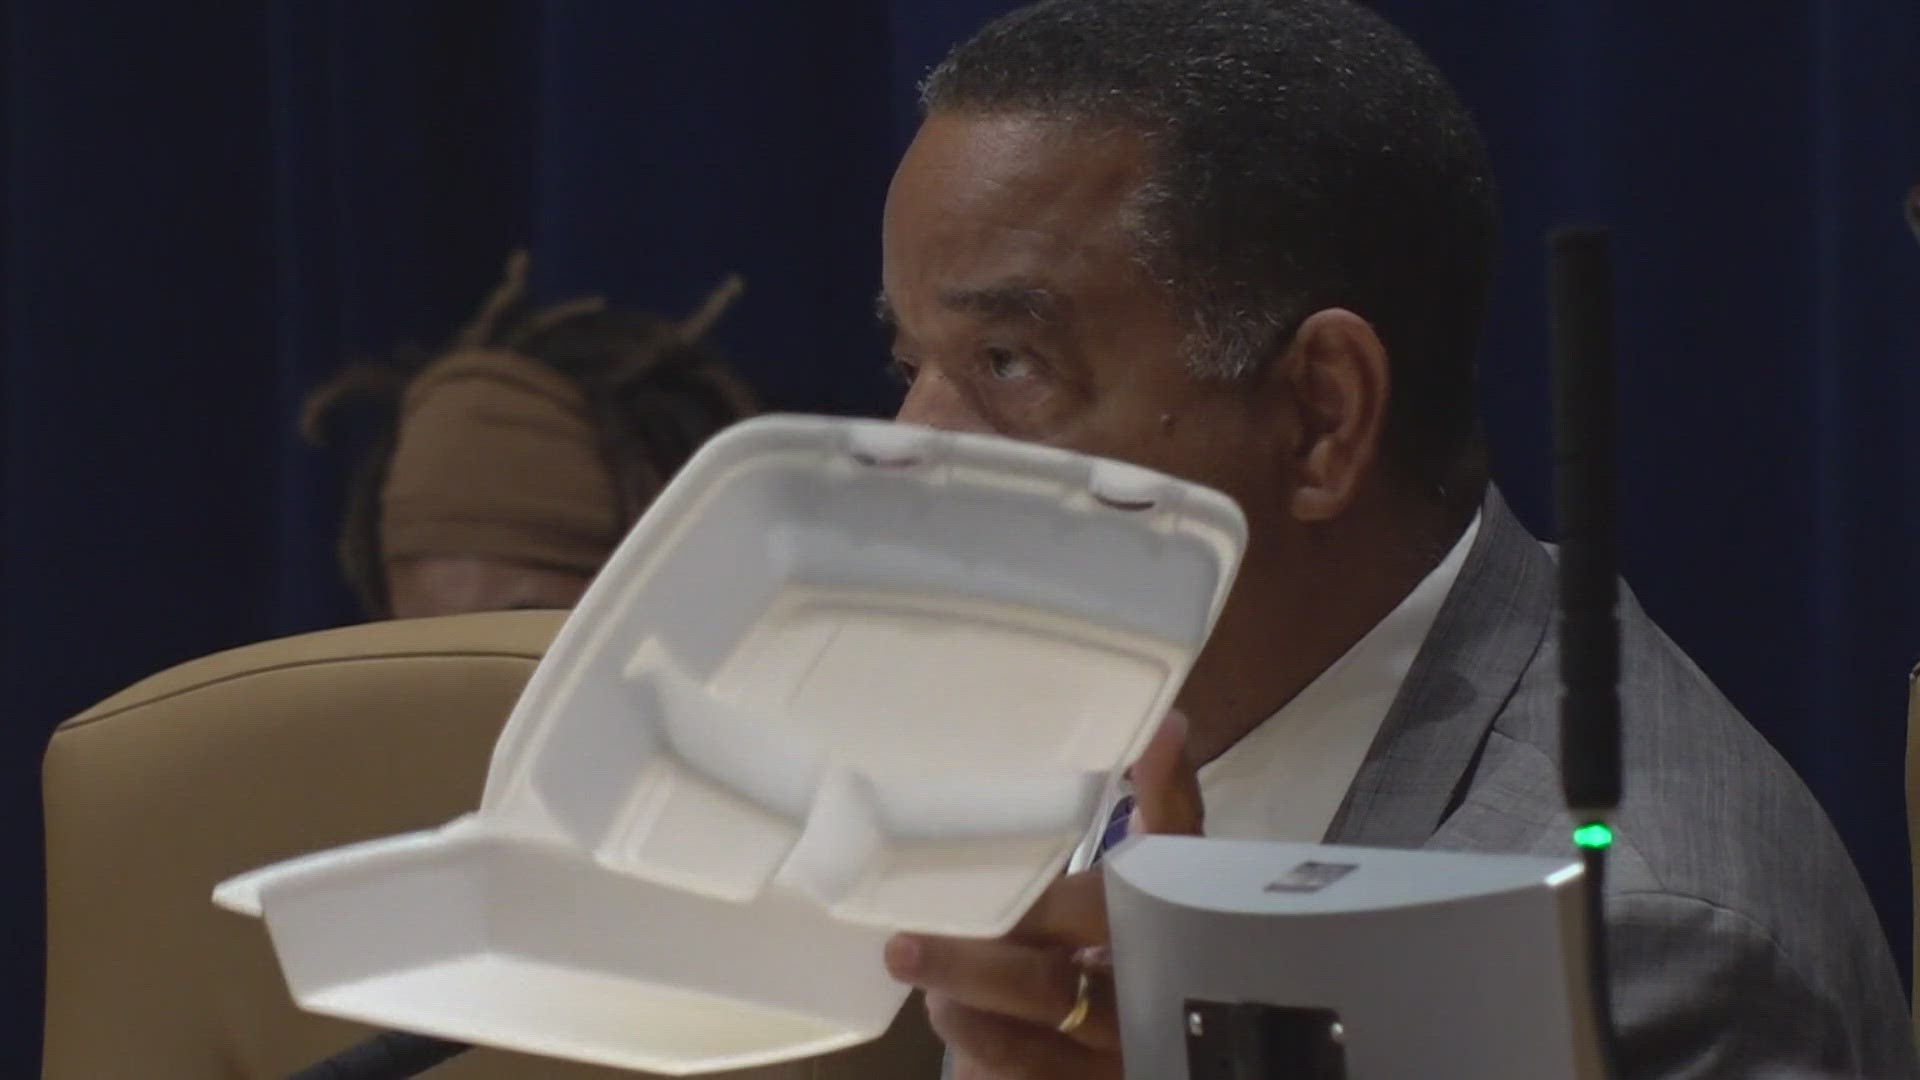 Cm. Eugene Green stressed it would only apply to people dropping off unsealed or unattended food.